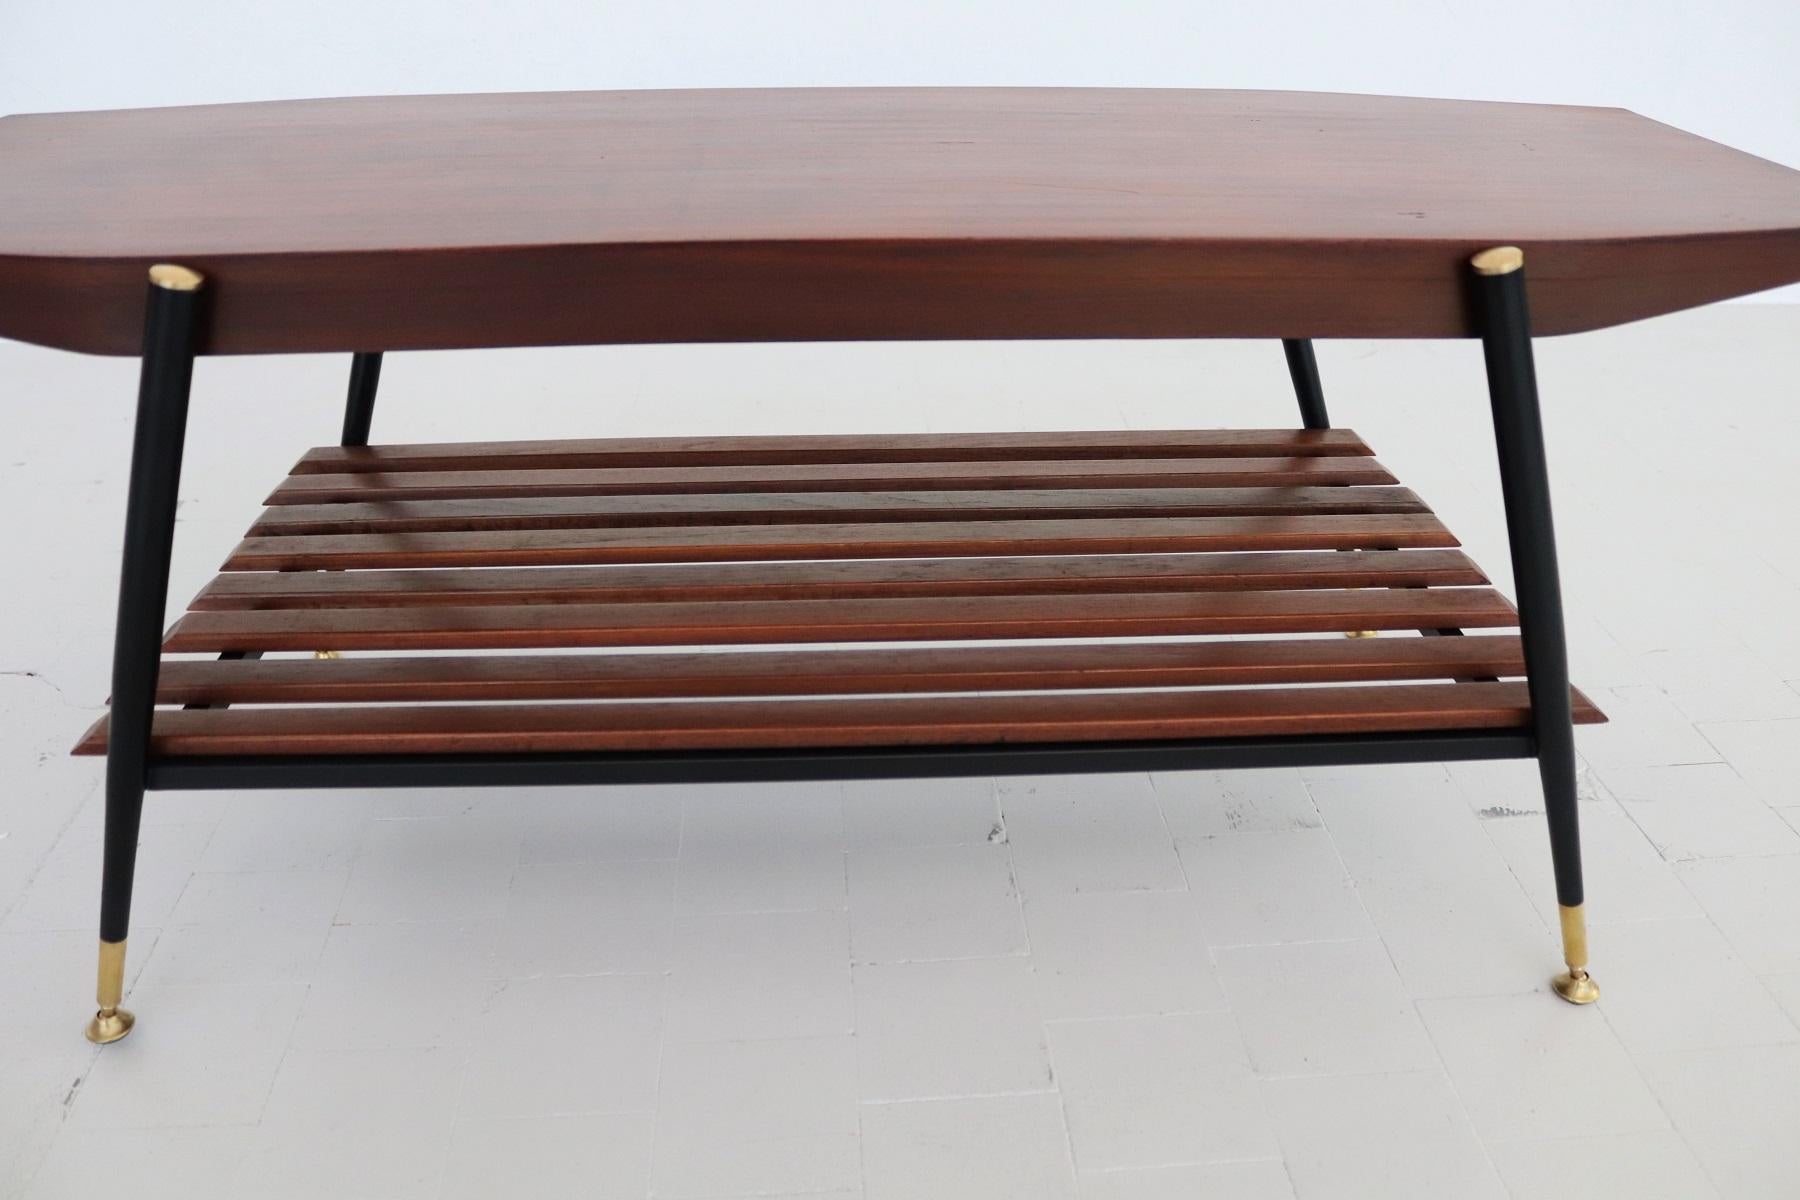 Italian Midcentury Octagonal Coffee Table in Mahogany Veneer with Brass Details For Sale 3